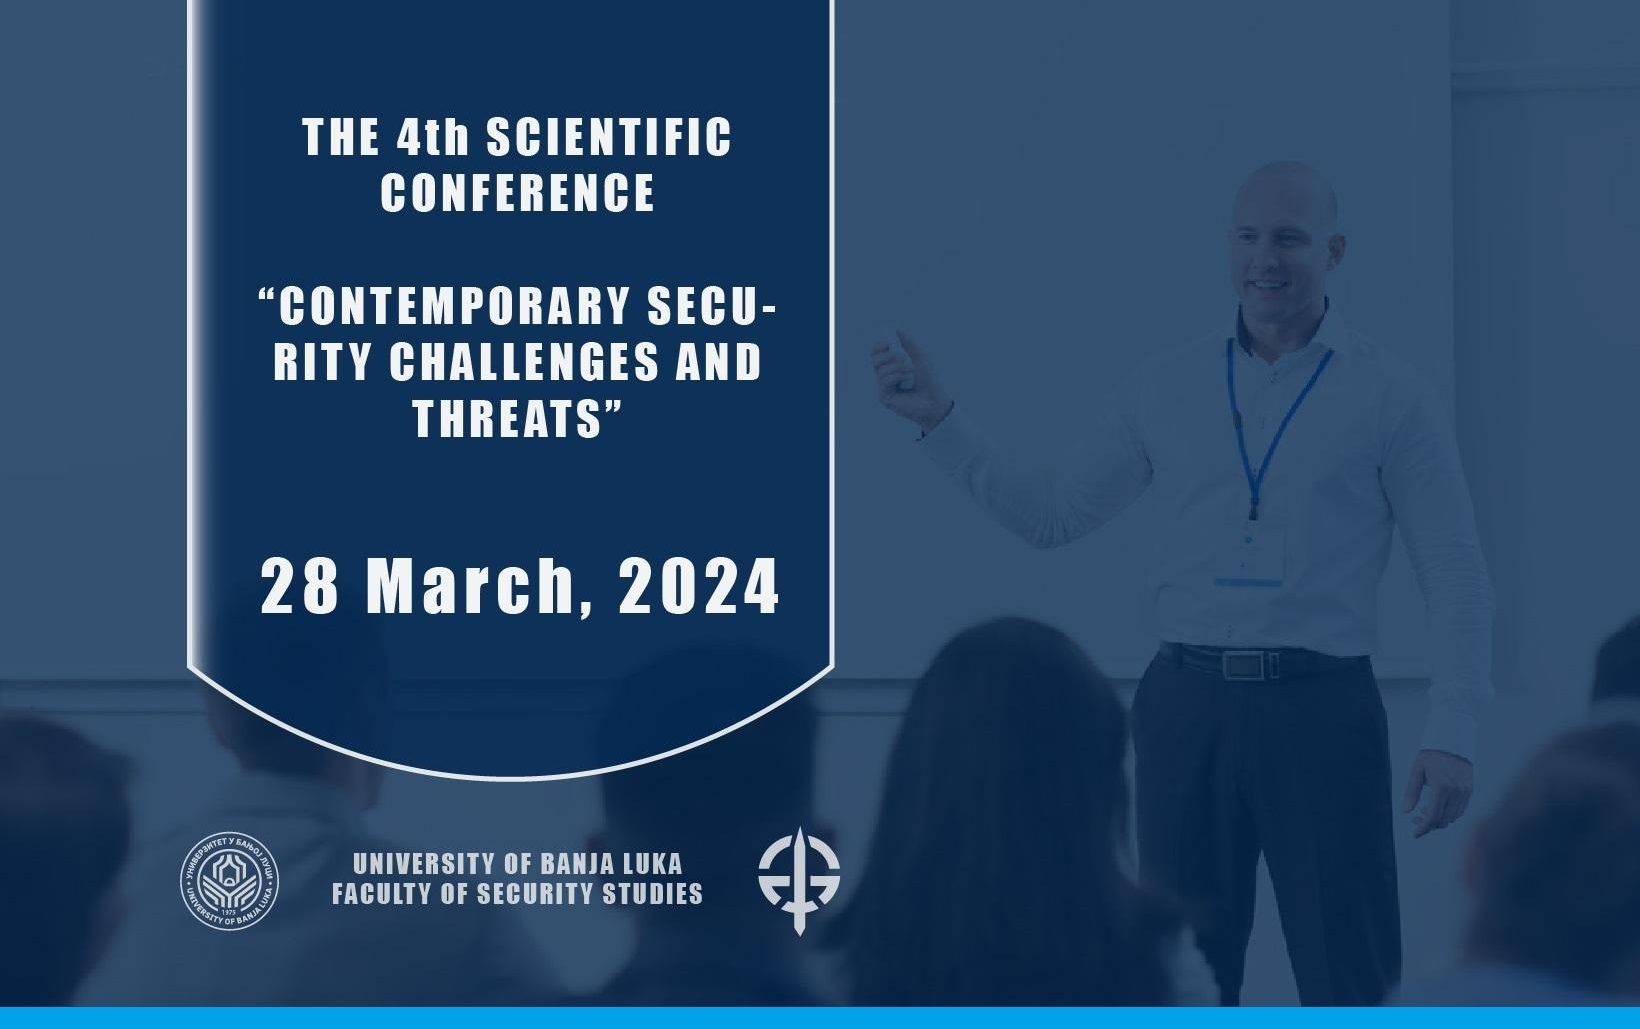 The 4th Scientific Conference “Contemporary Security Challenges and Threats”: March 28, 2024